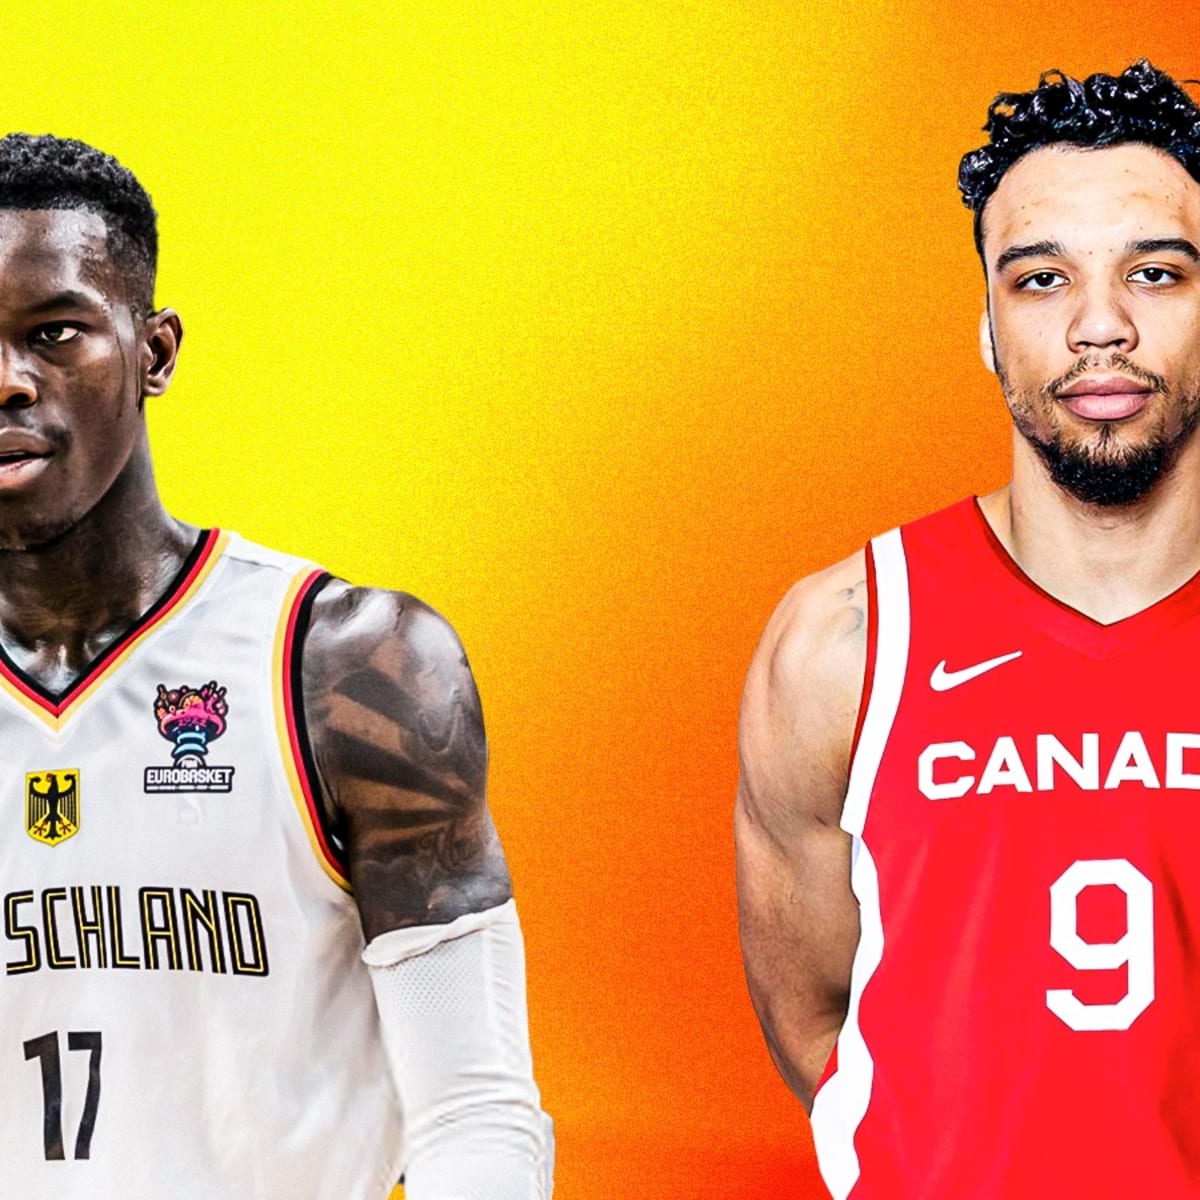 Dennis Schroder trolled Dillon Brooks during Canada-Germany exhibition